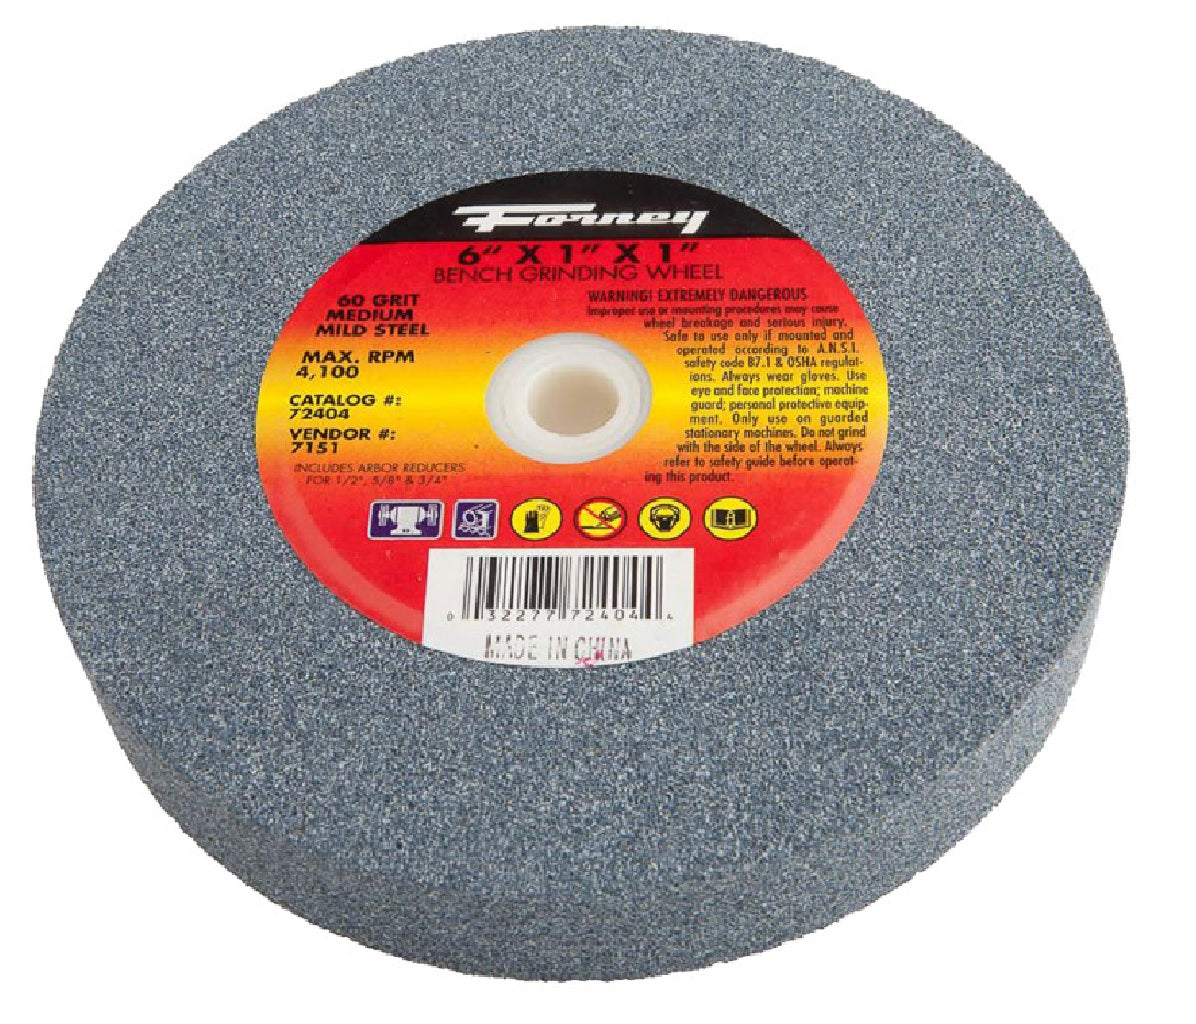 Forney 72404 Bench Grinding Wheel, 60-Grit